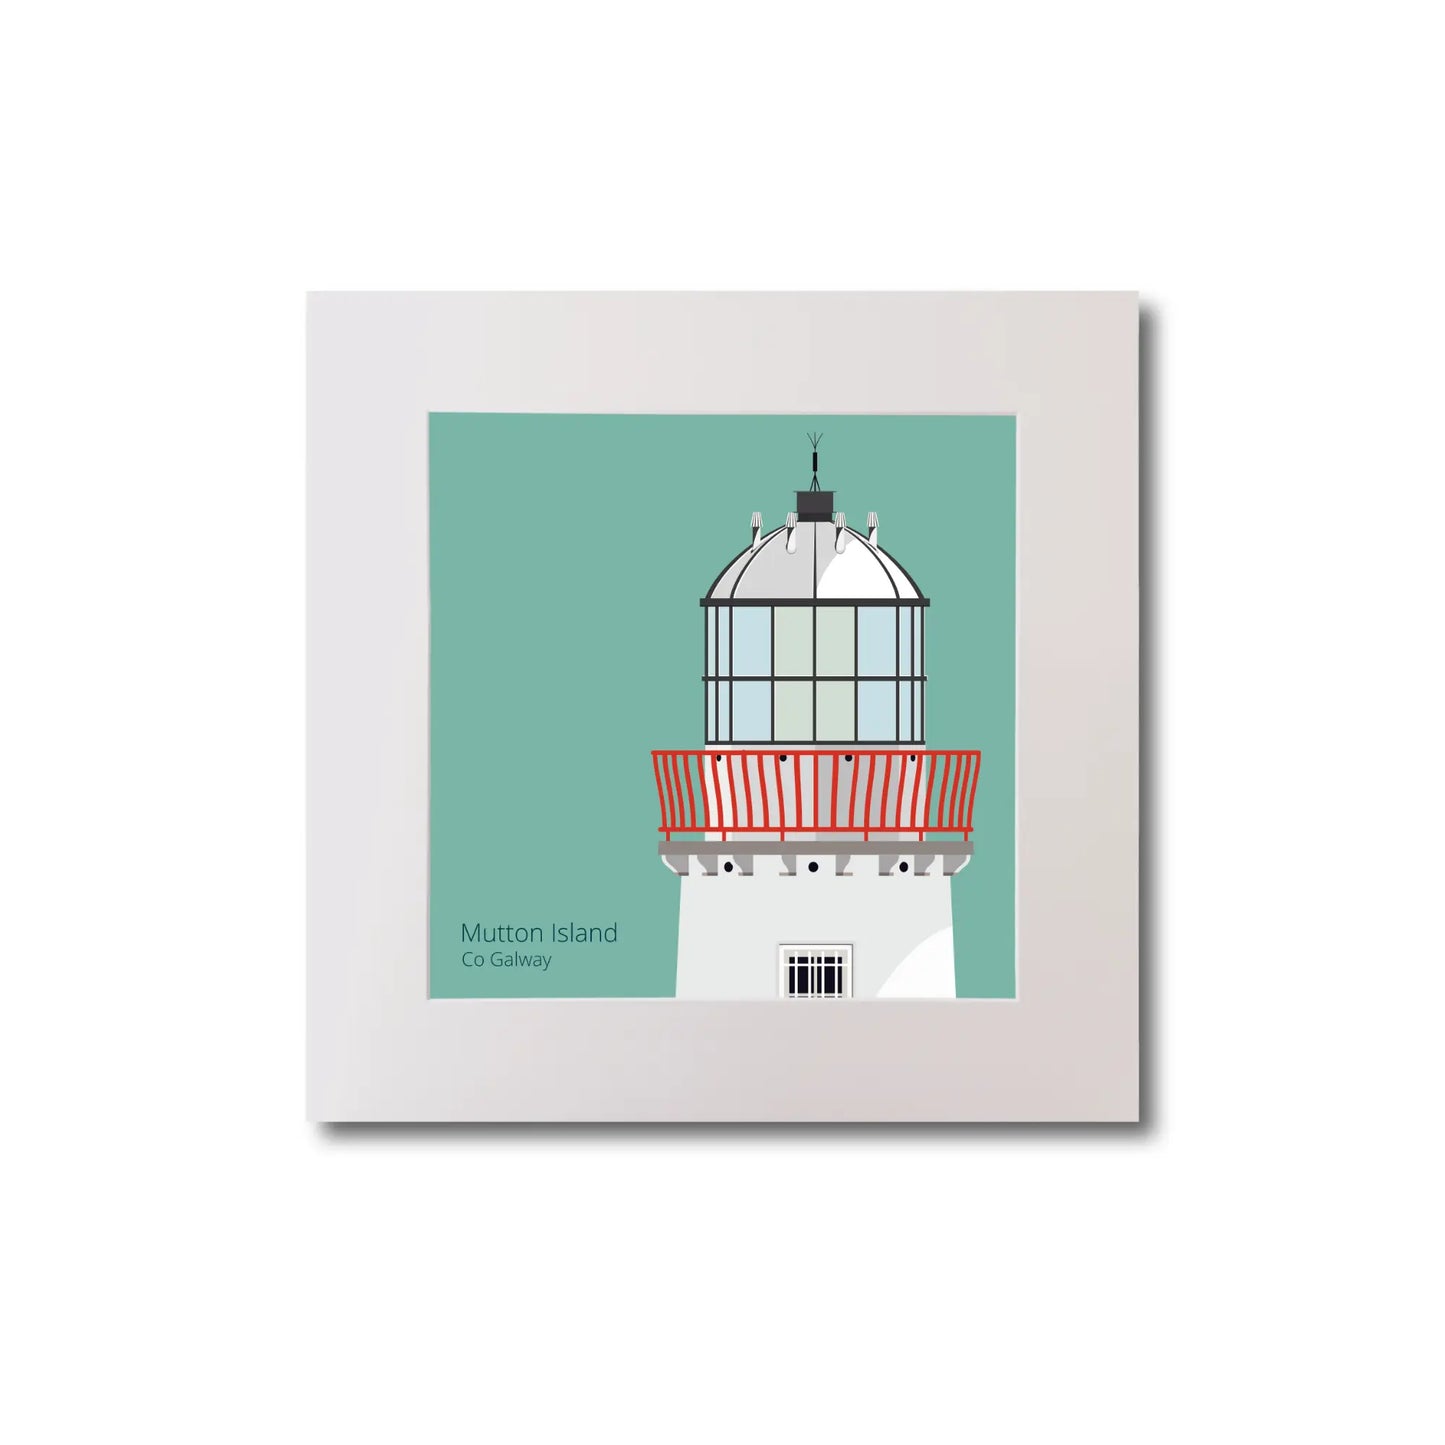 Illustration of Mutton Island lighthouse on an ocean green background, mounted and measuring 20x20cm.